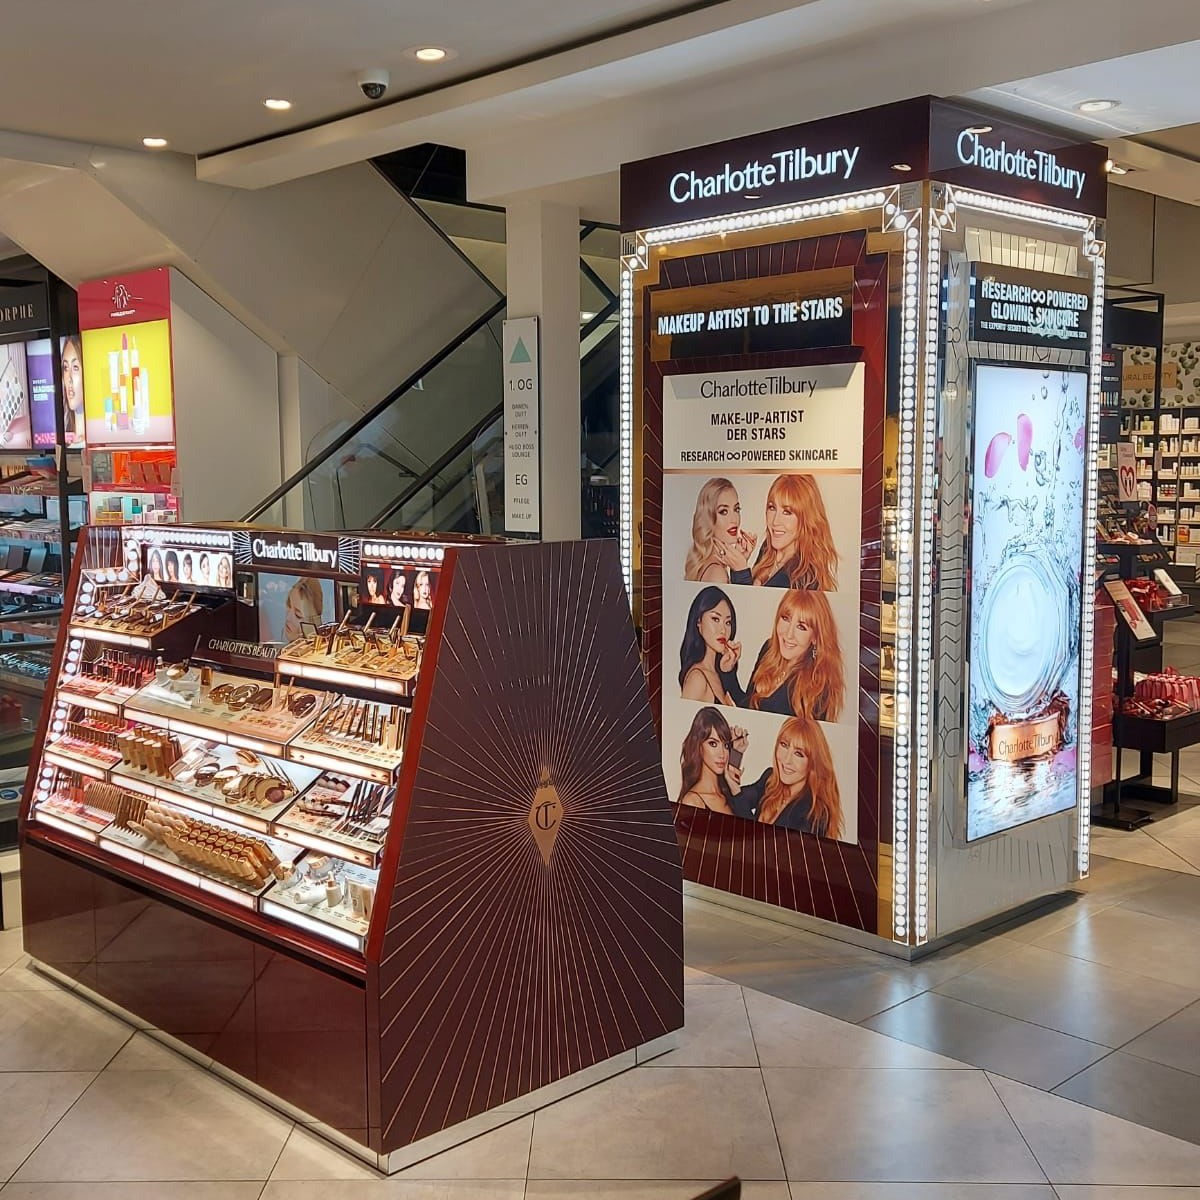 Charlotte Tilbury store with different makeup products and skincare items displayed.